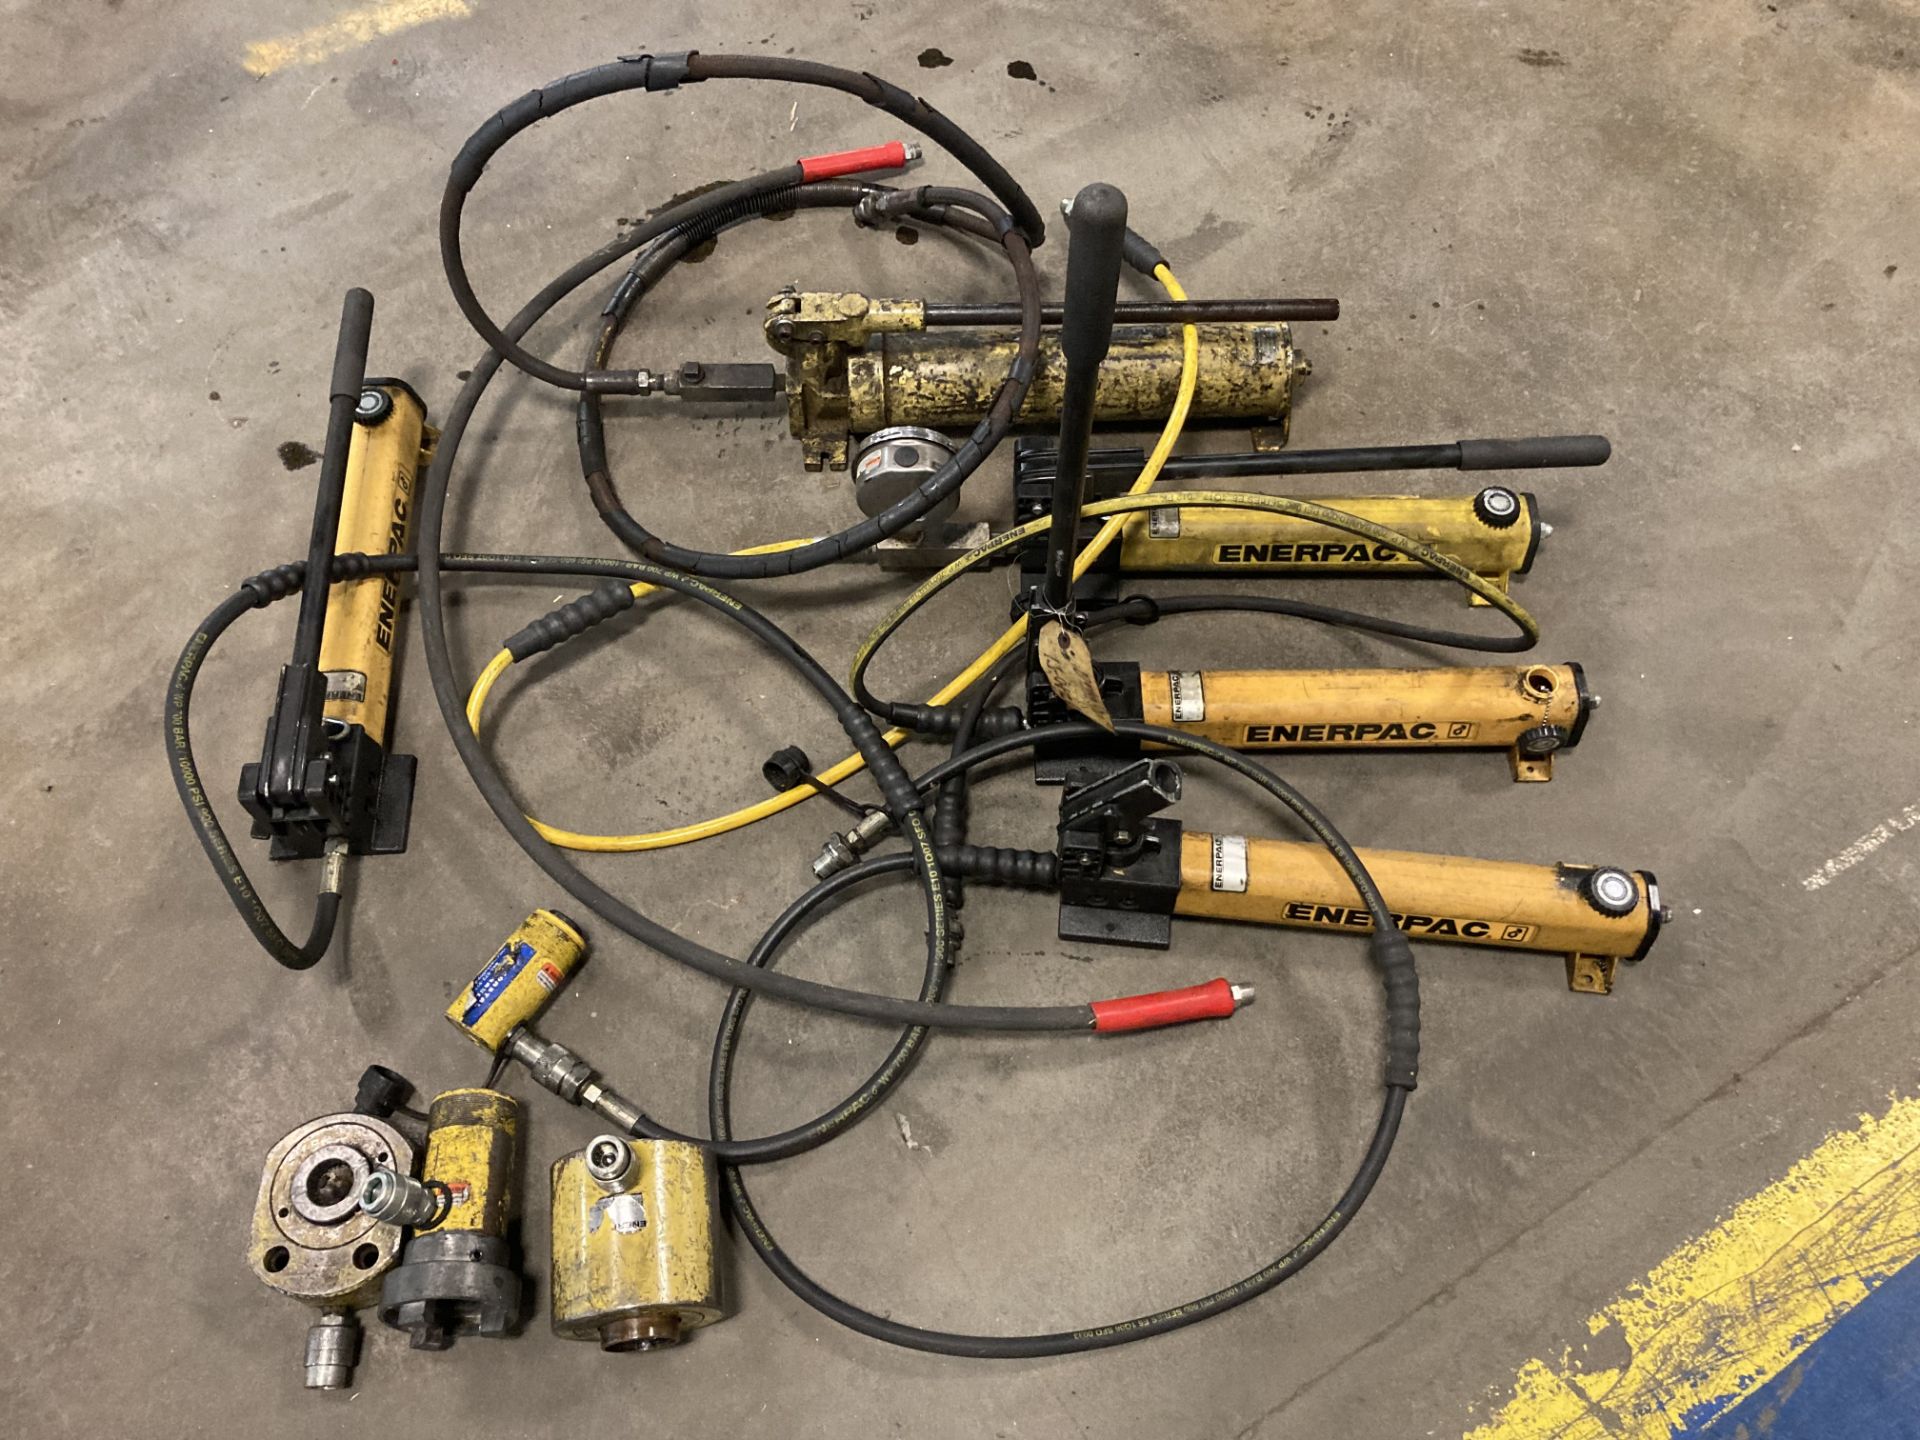 Lot of (5) Enerpac Porta Power Hydraulic Hand Pumps - Image 8 of 8